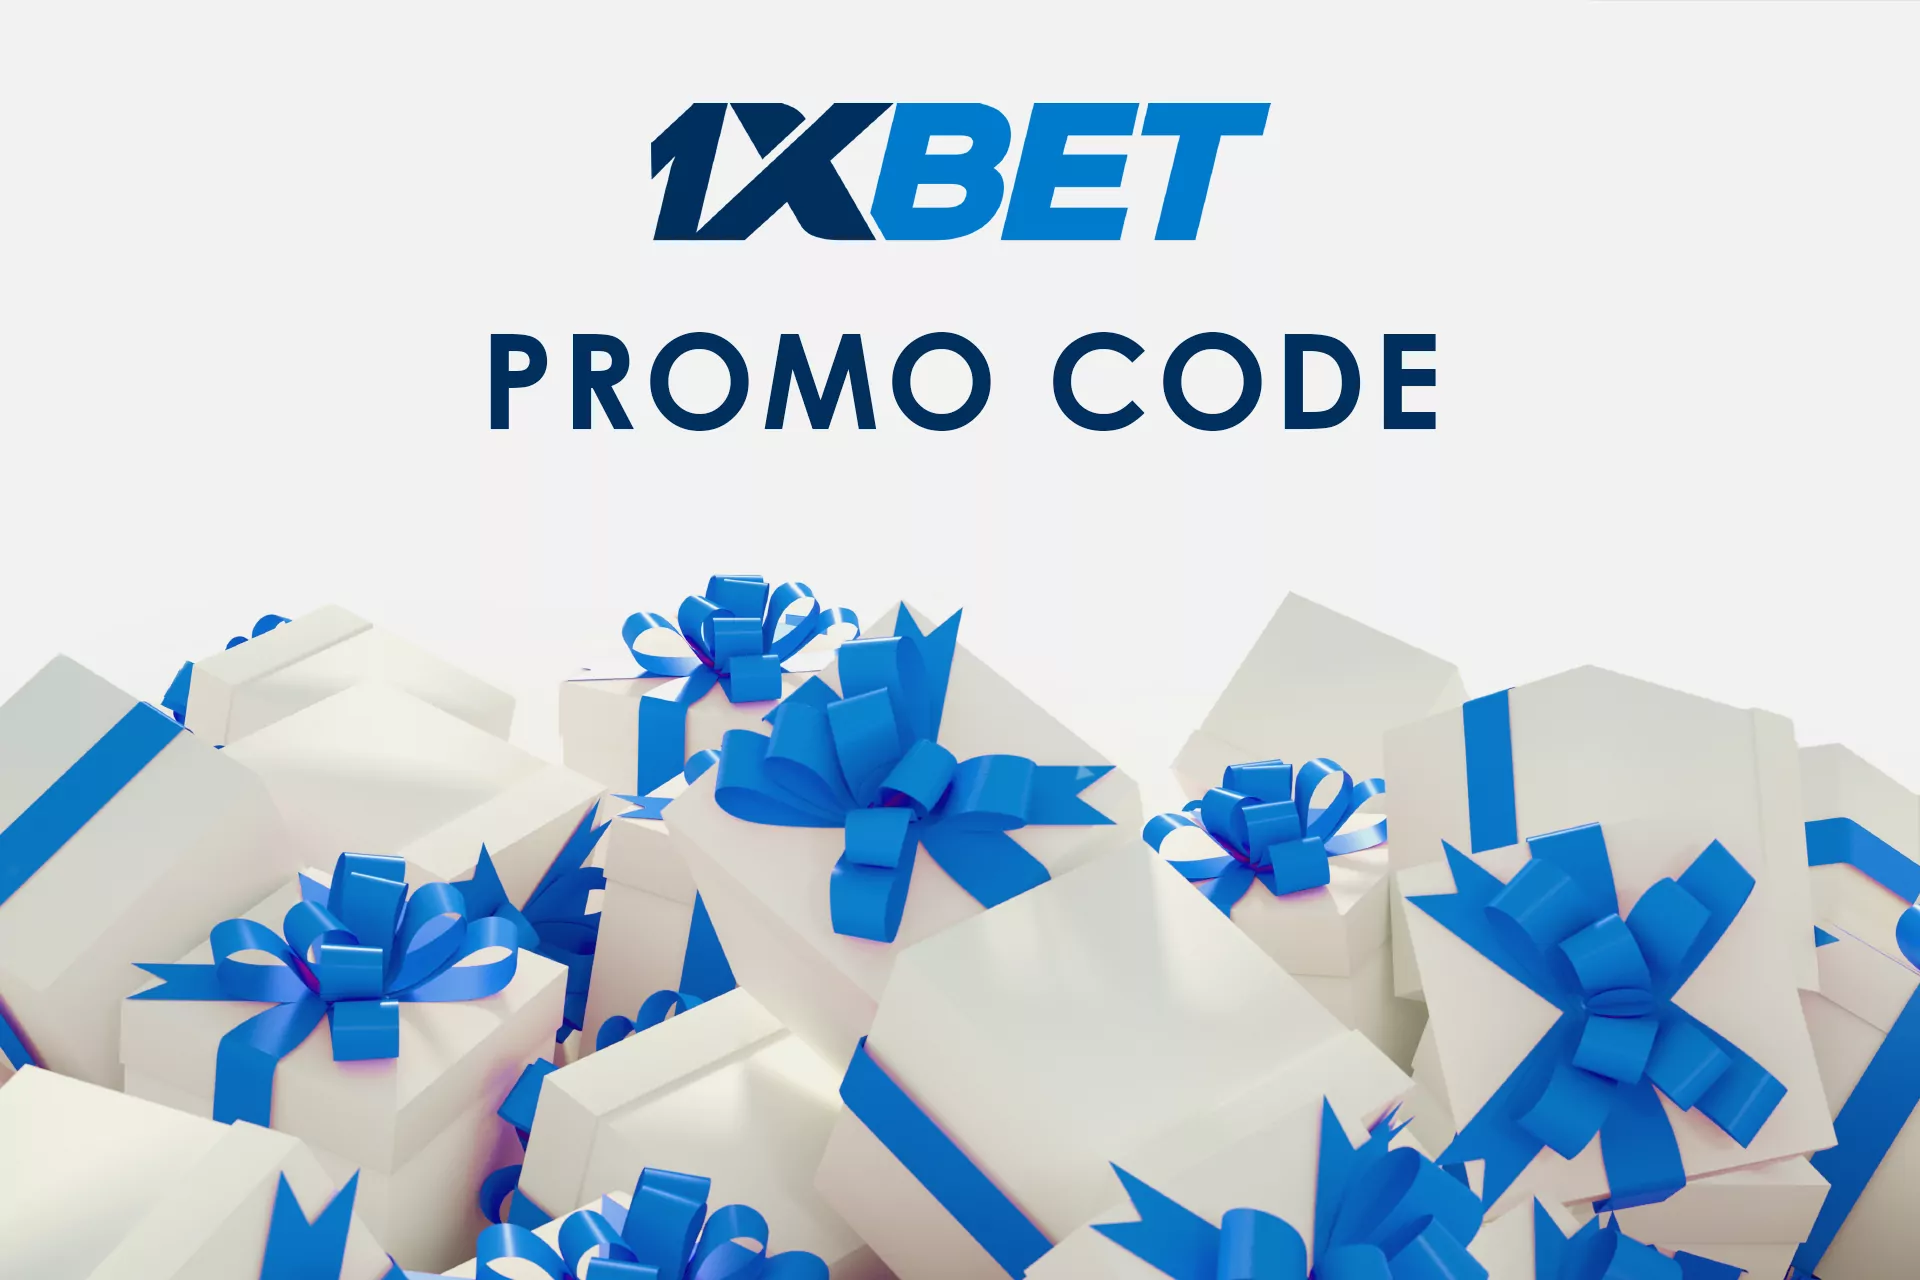 Every new 1xBet user from India can use a unique promo code 1XREG2021 to get a welcome bonus.